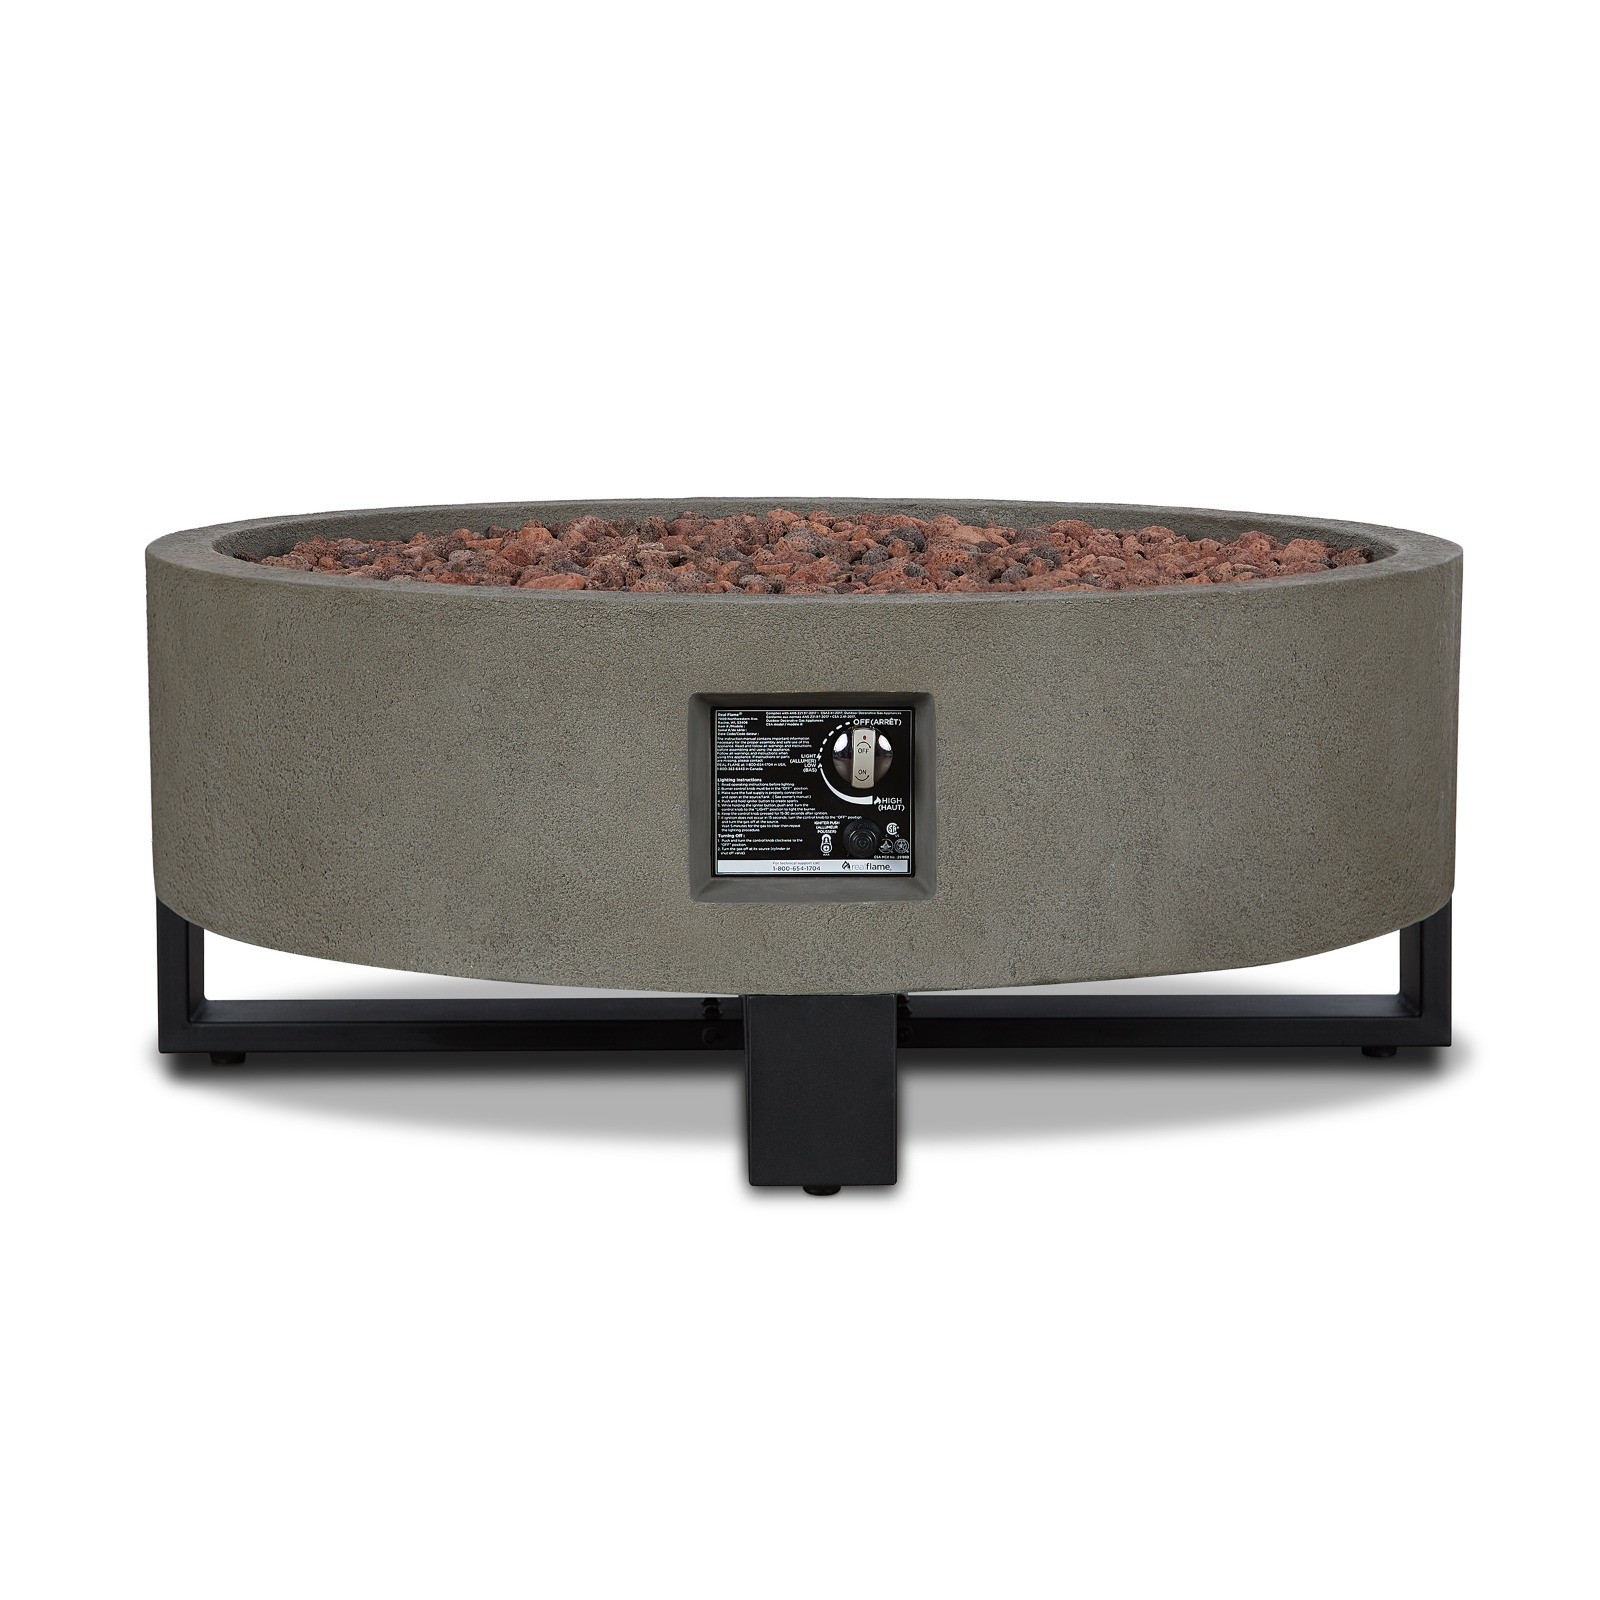 Idledale Propane Fire Pit Fire Bowl Outdoor Fireplace Fire Table for Backyard or Patio